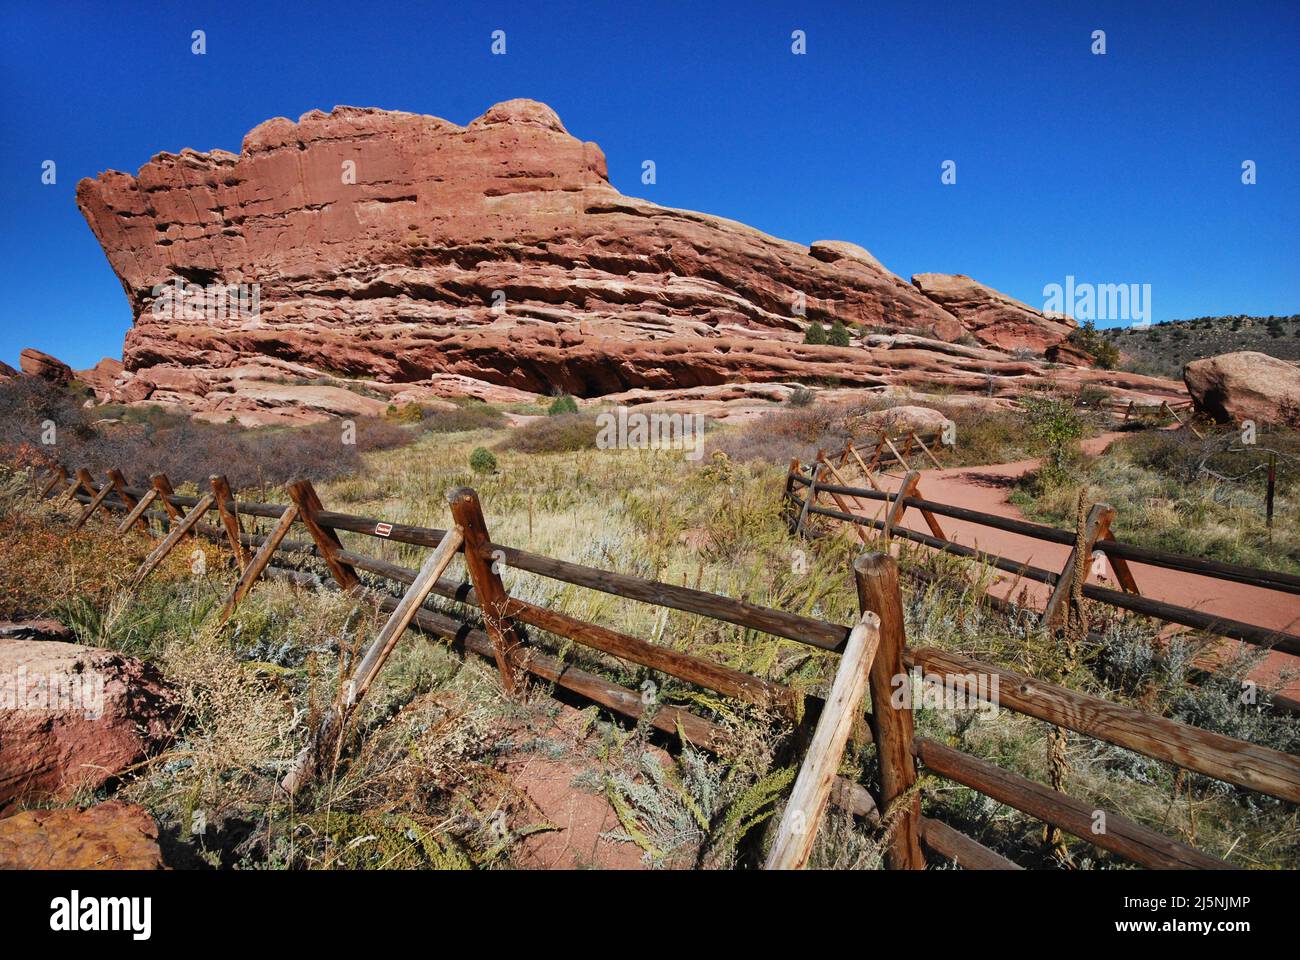 View destroying fences closing off areas and limiting walkways and artistic views at Red Rocks Park in Morrison Colorado Stock Photo